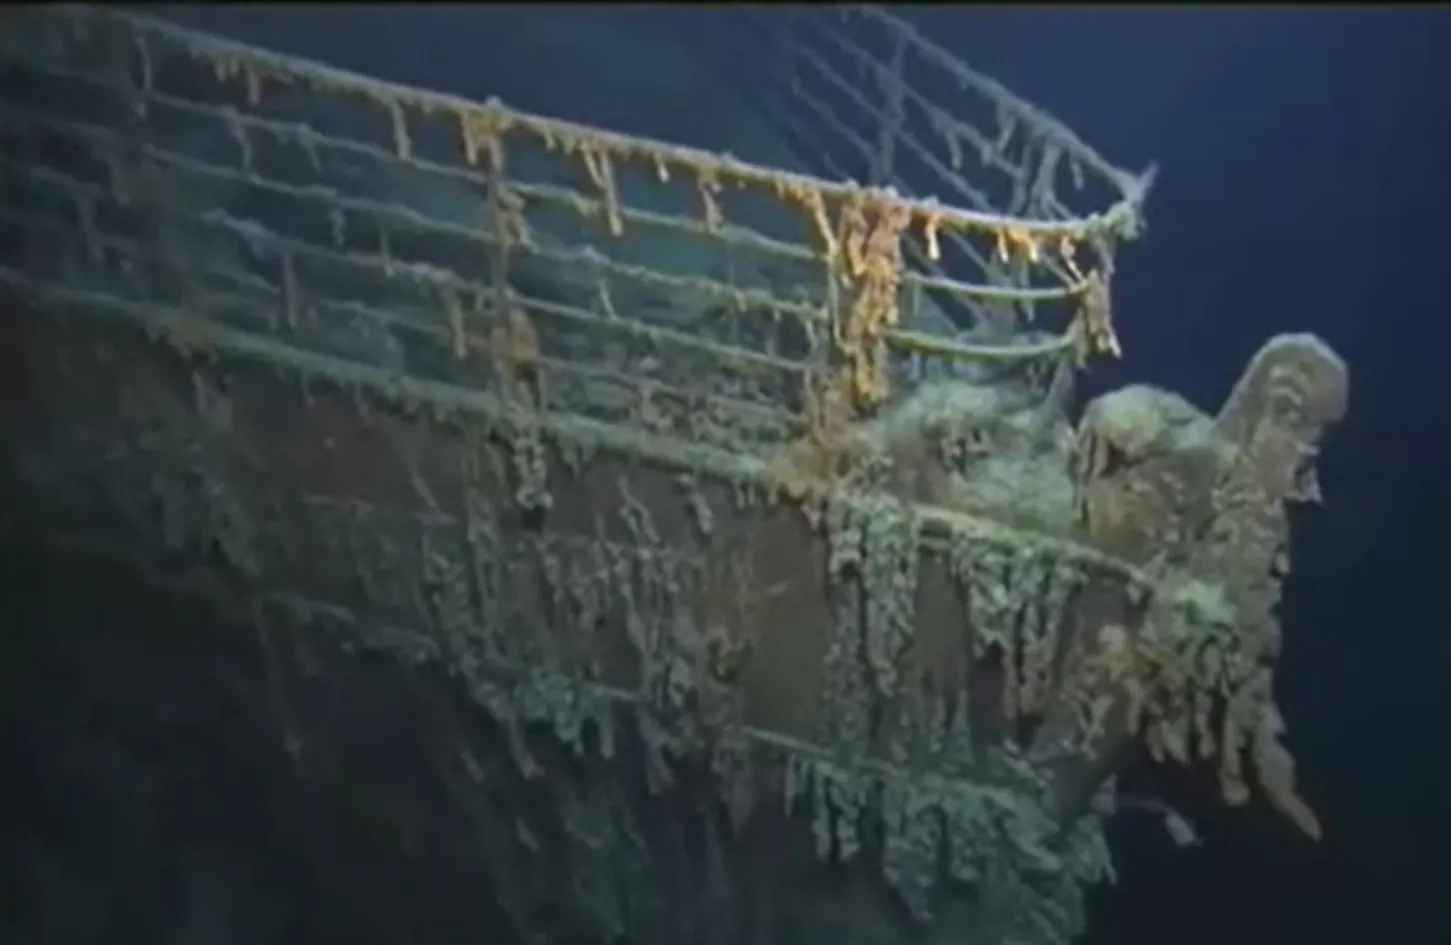 Rare video of 1986 dive in Titanic wreckage released by Woods Hole  Oceanographic Institution